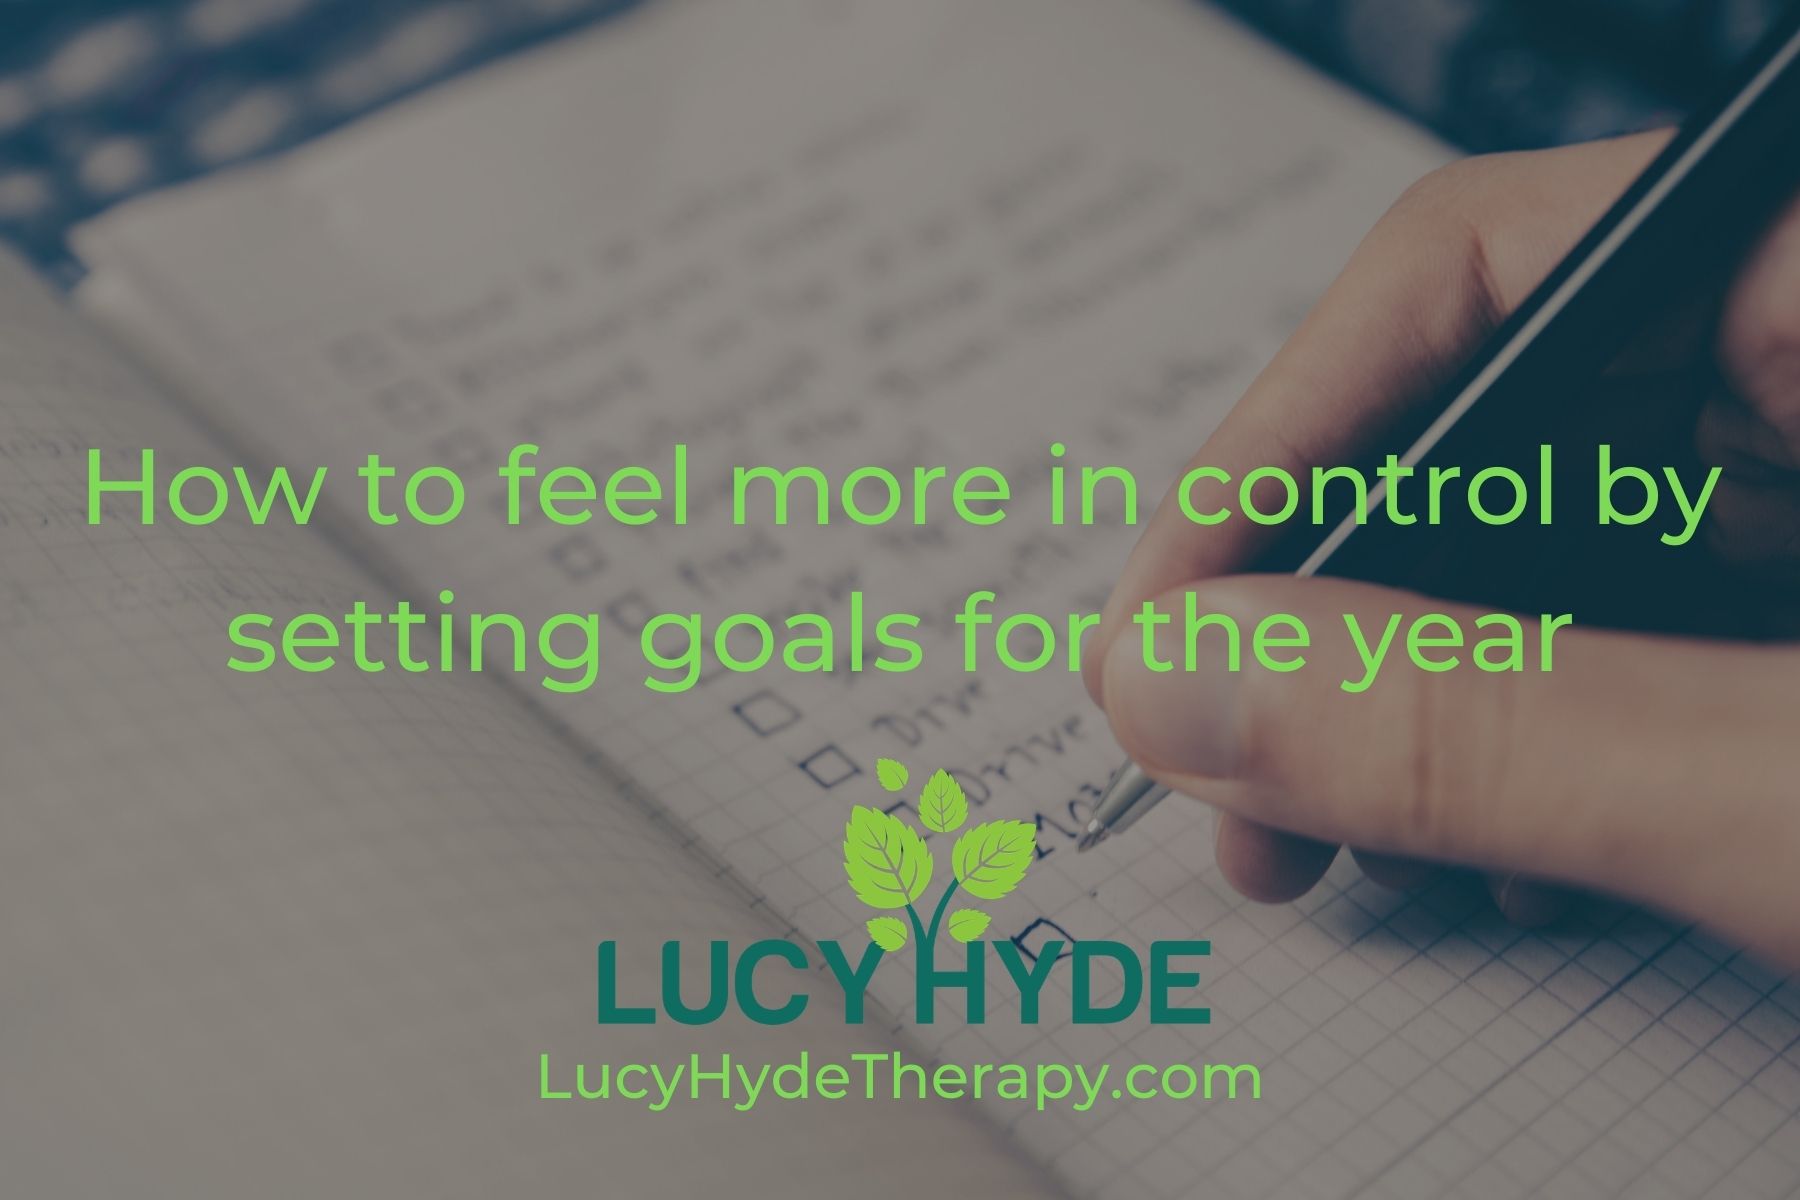 How to feel more in control by setting goals for the year